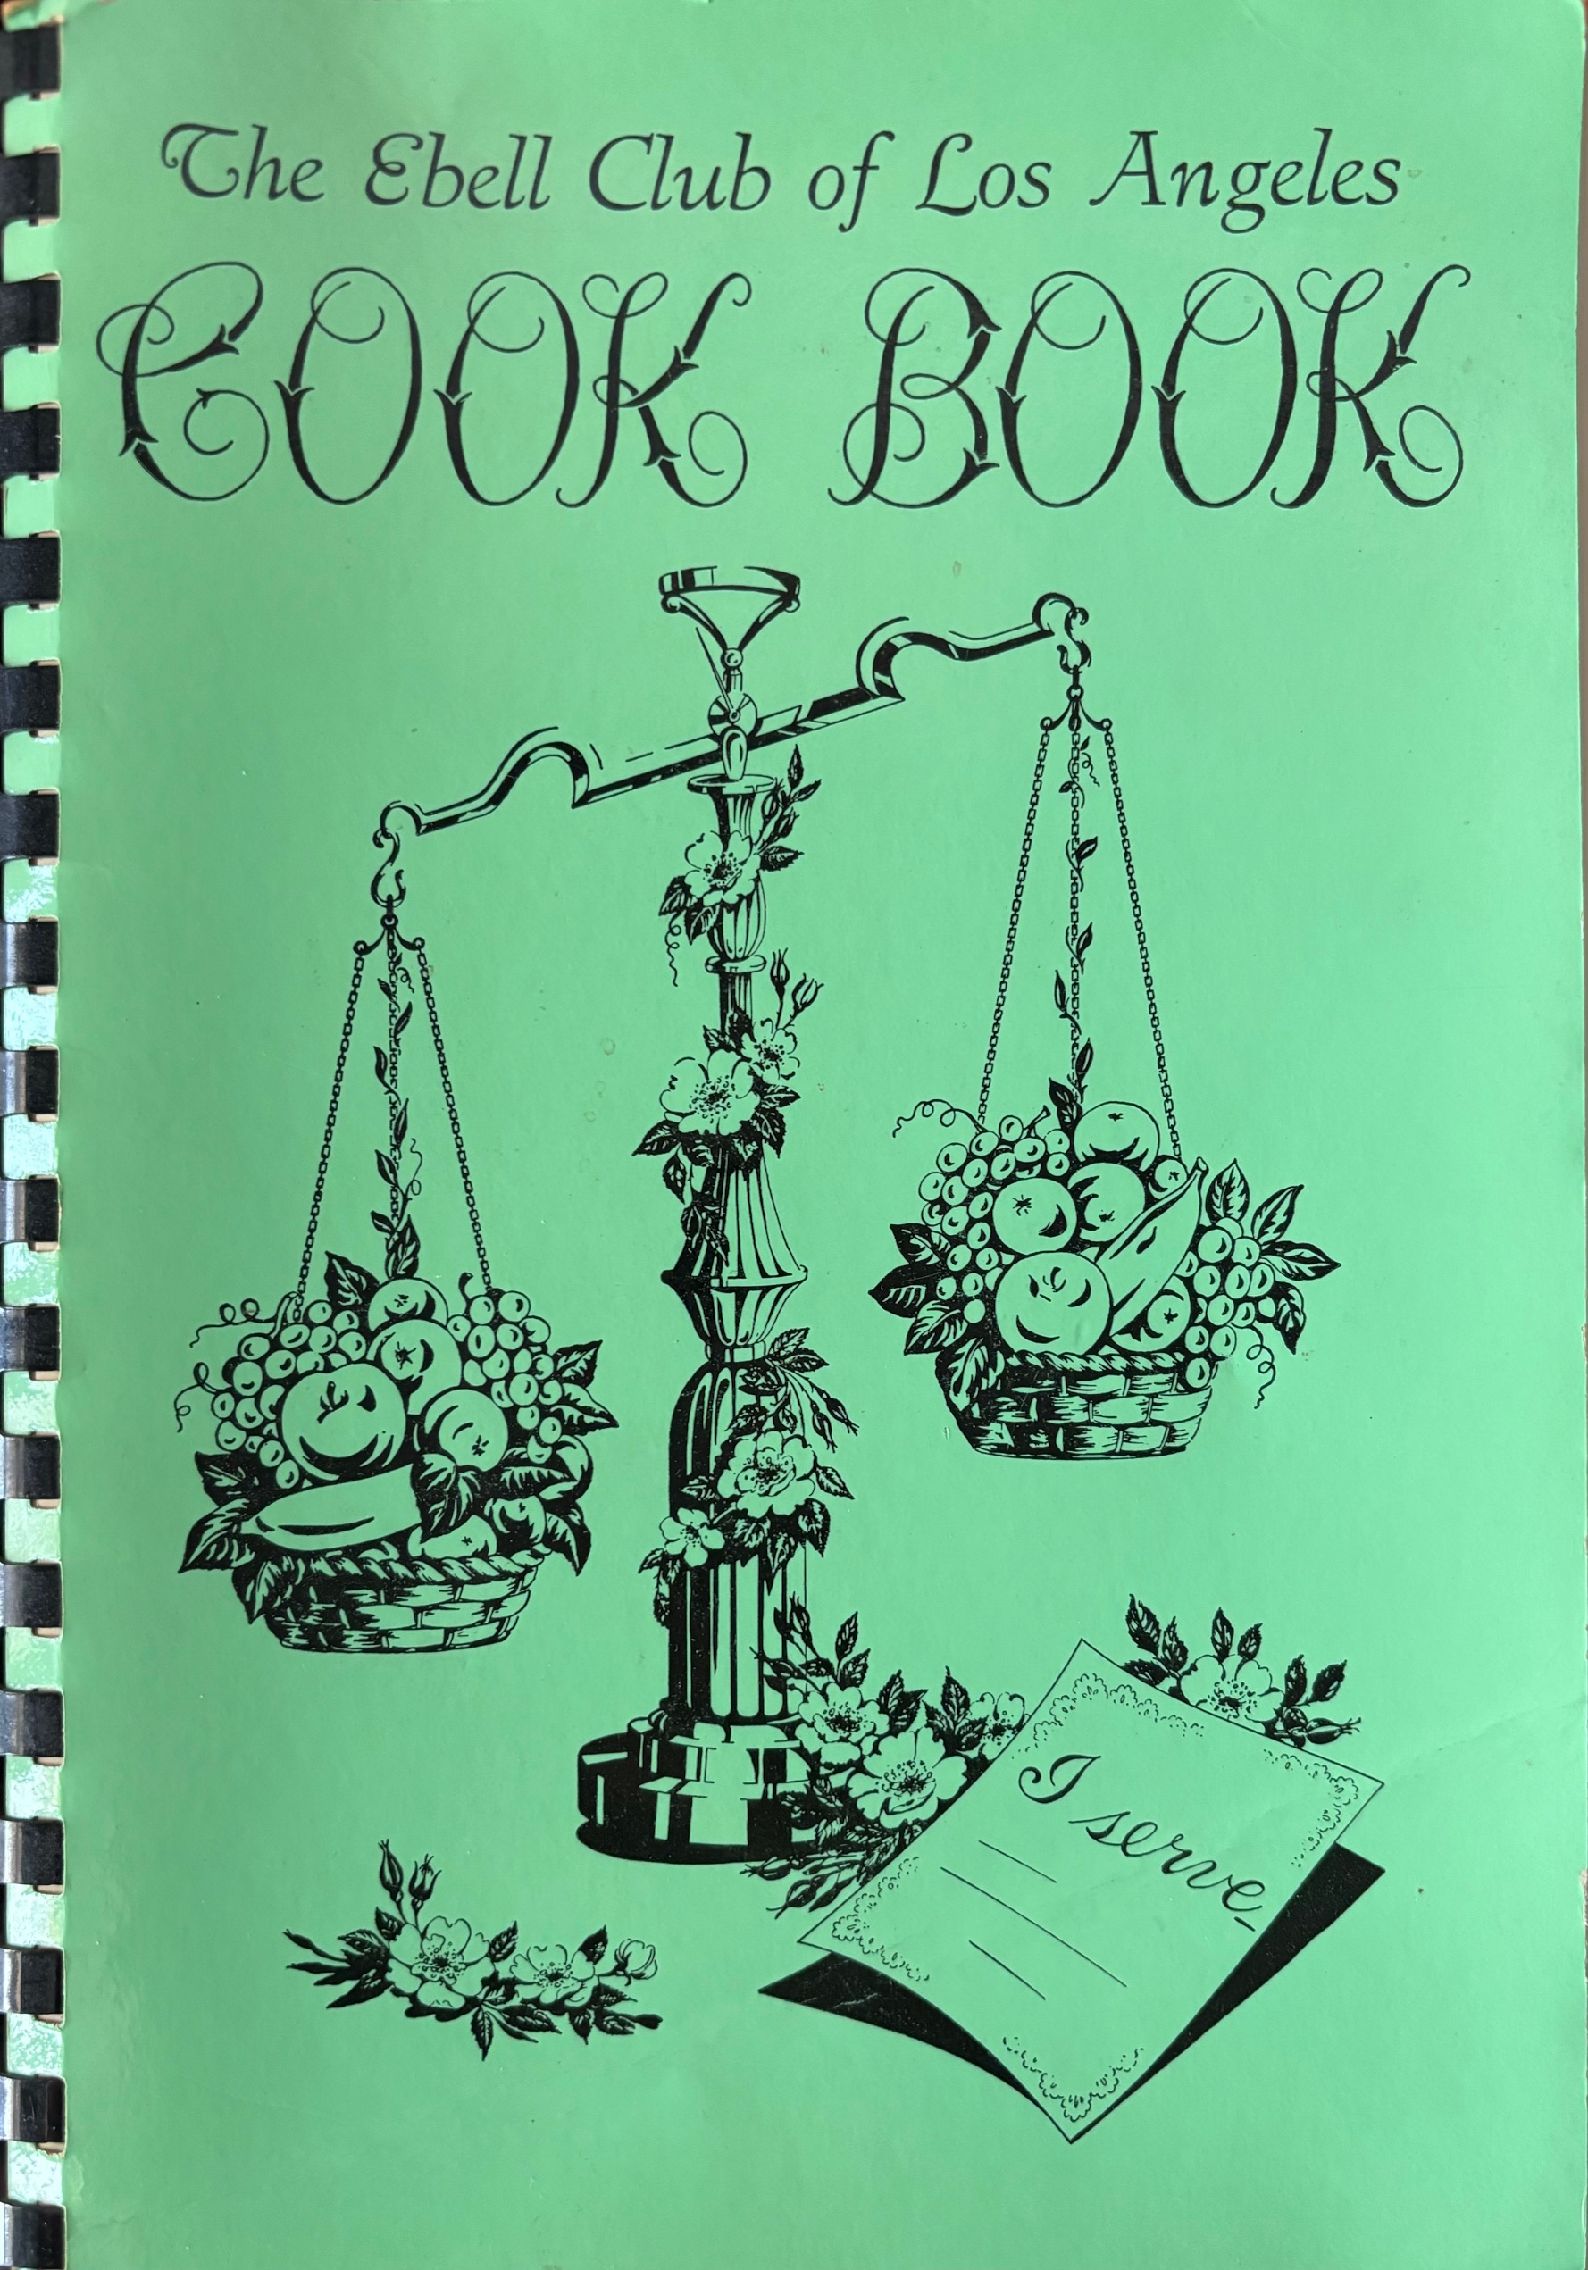 (*NEW ARRIVAL*) (Los Angeles) The Ebell Club of Los Angeles Cook Book